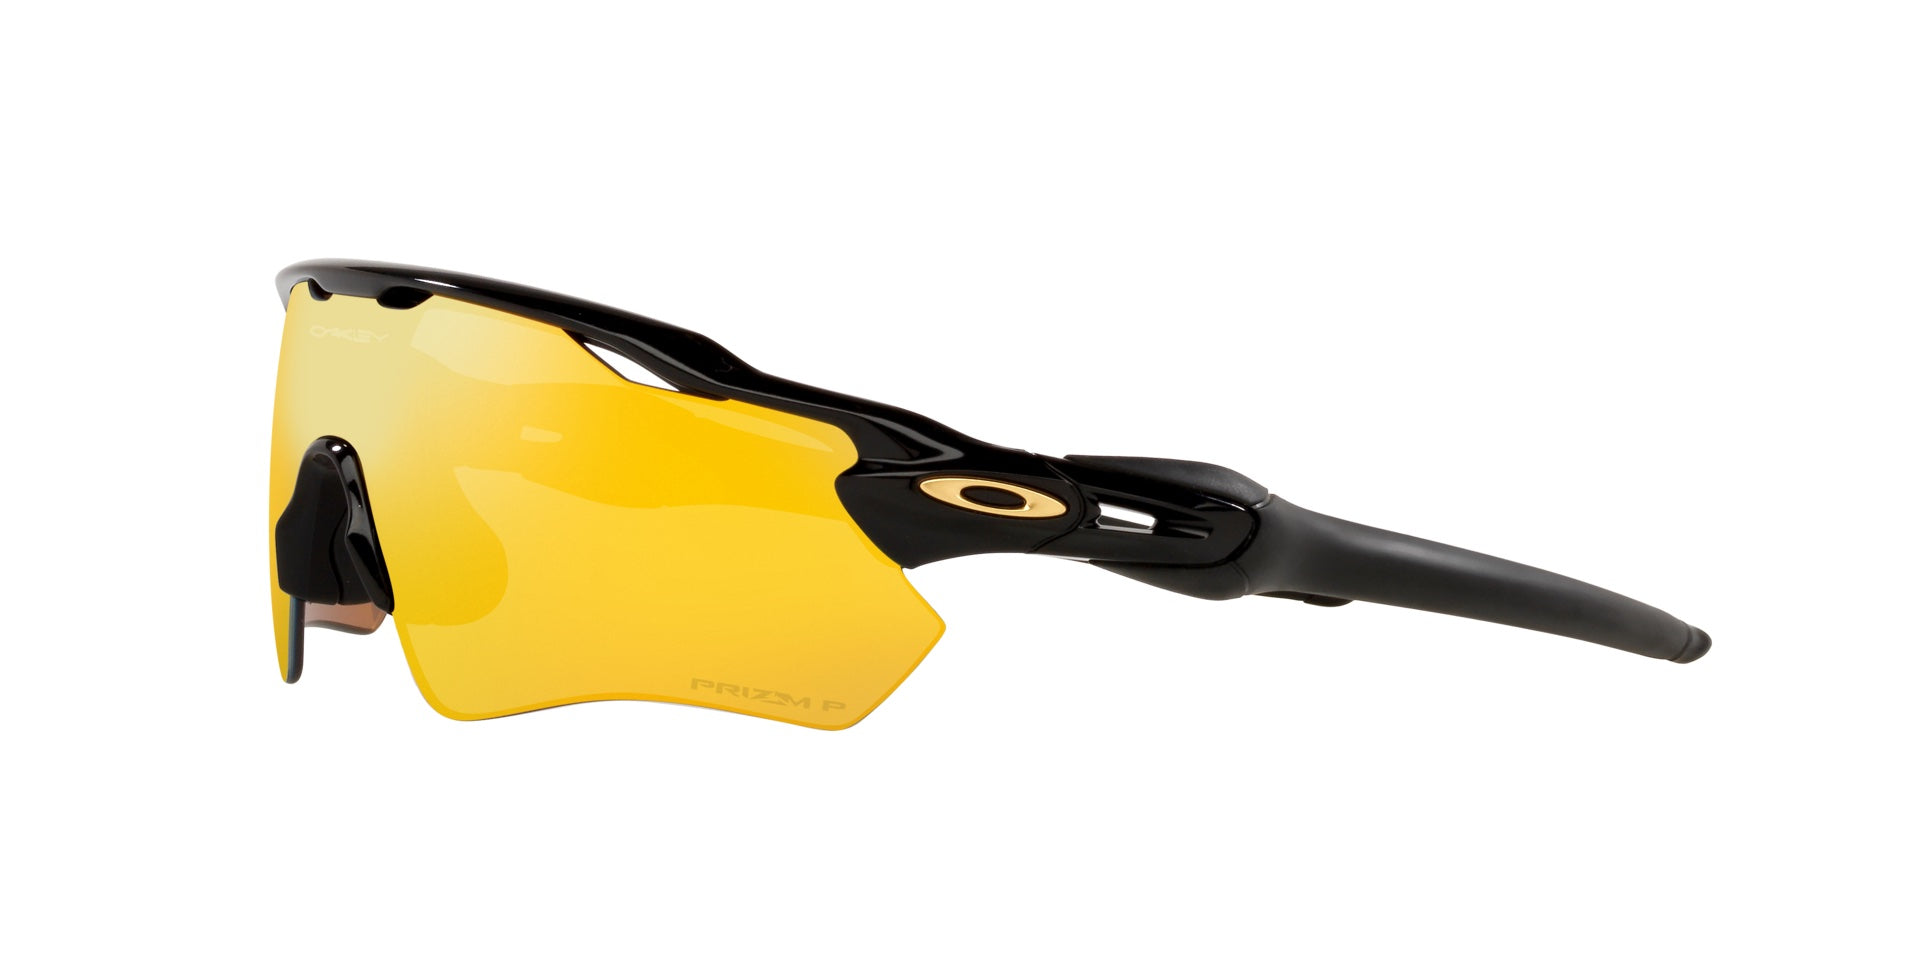 Men’s sunglasses - A side view of the Radar EV Path model:  A polished black, wrap-around frame made injected material. The lenses are 24k (Gold) and polarized. Oakley's gold logo is located by the hinges.